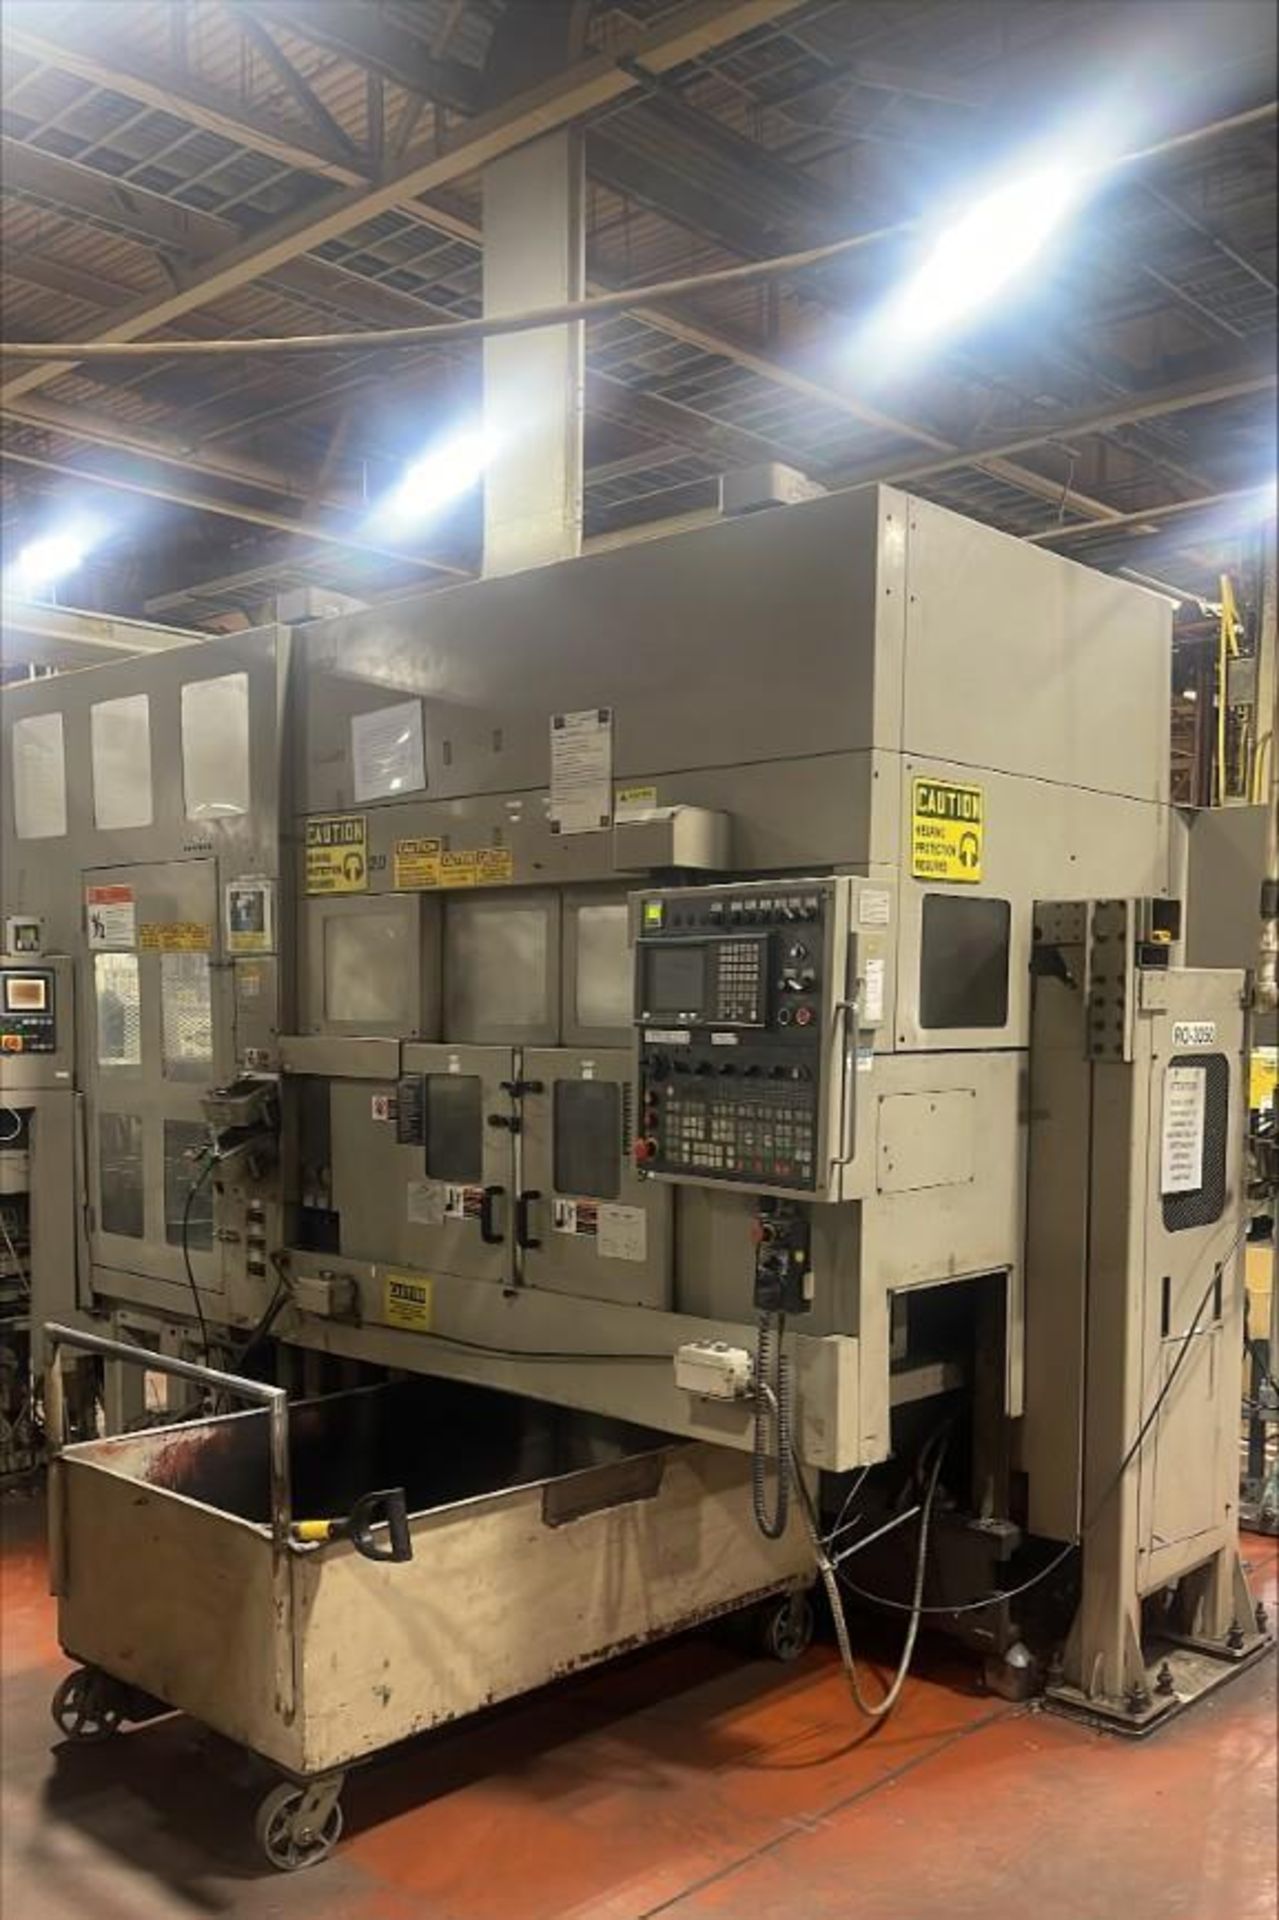 2001 Muratec MW120 Twin Spindle CNC Lathe - Image 6 of 7